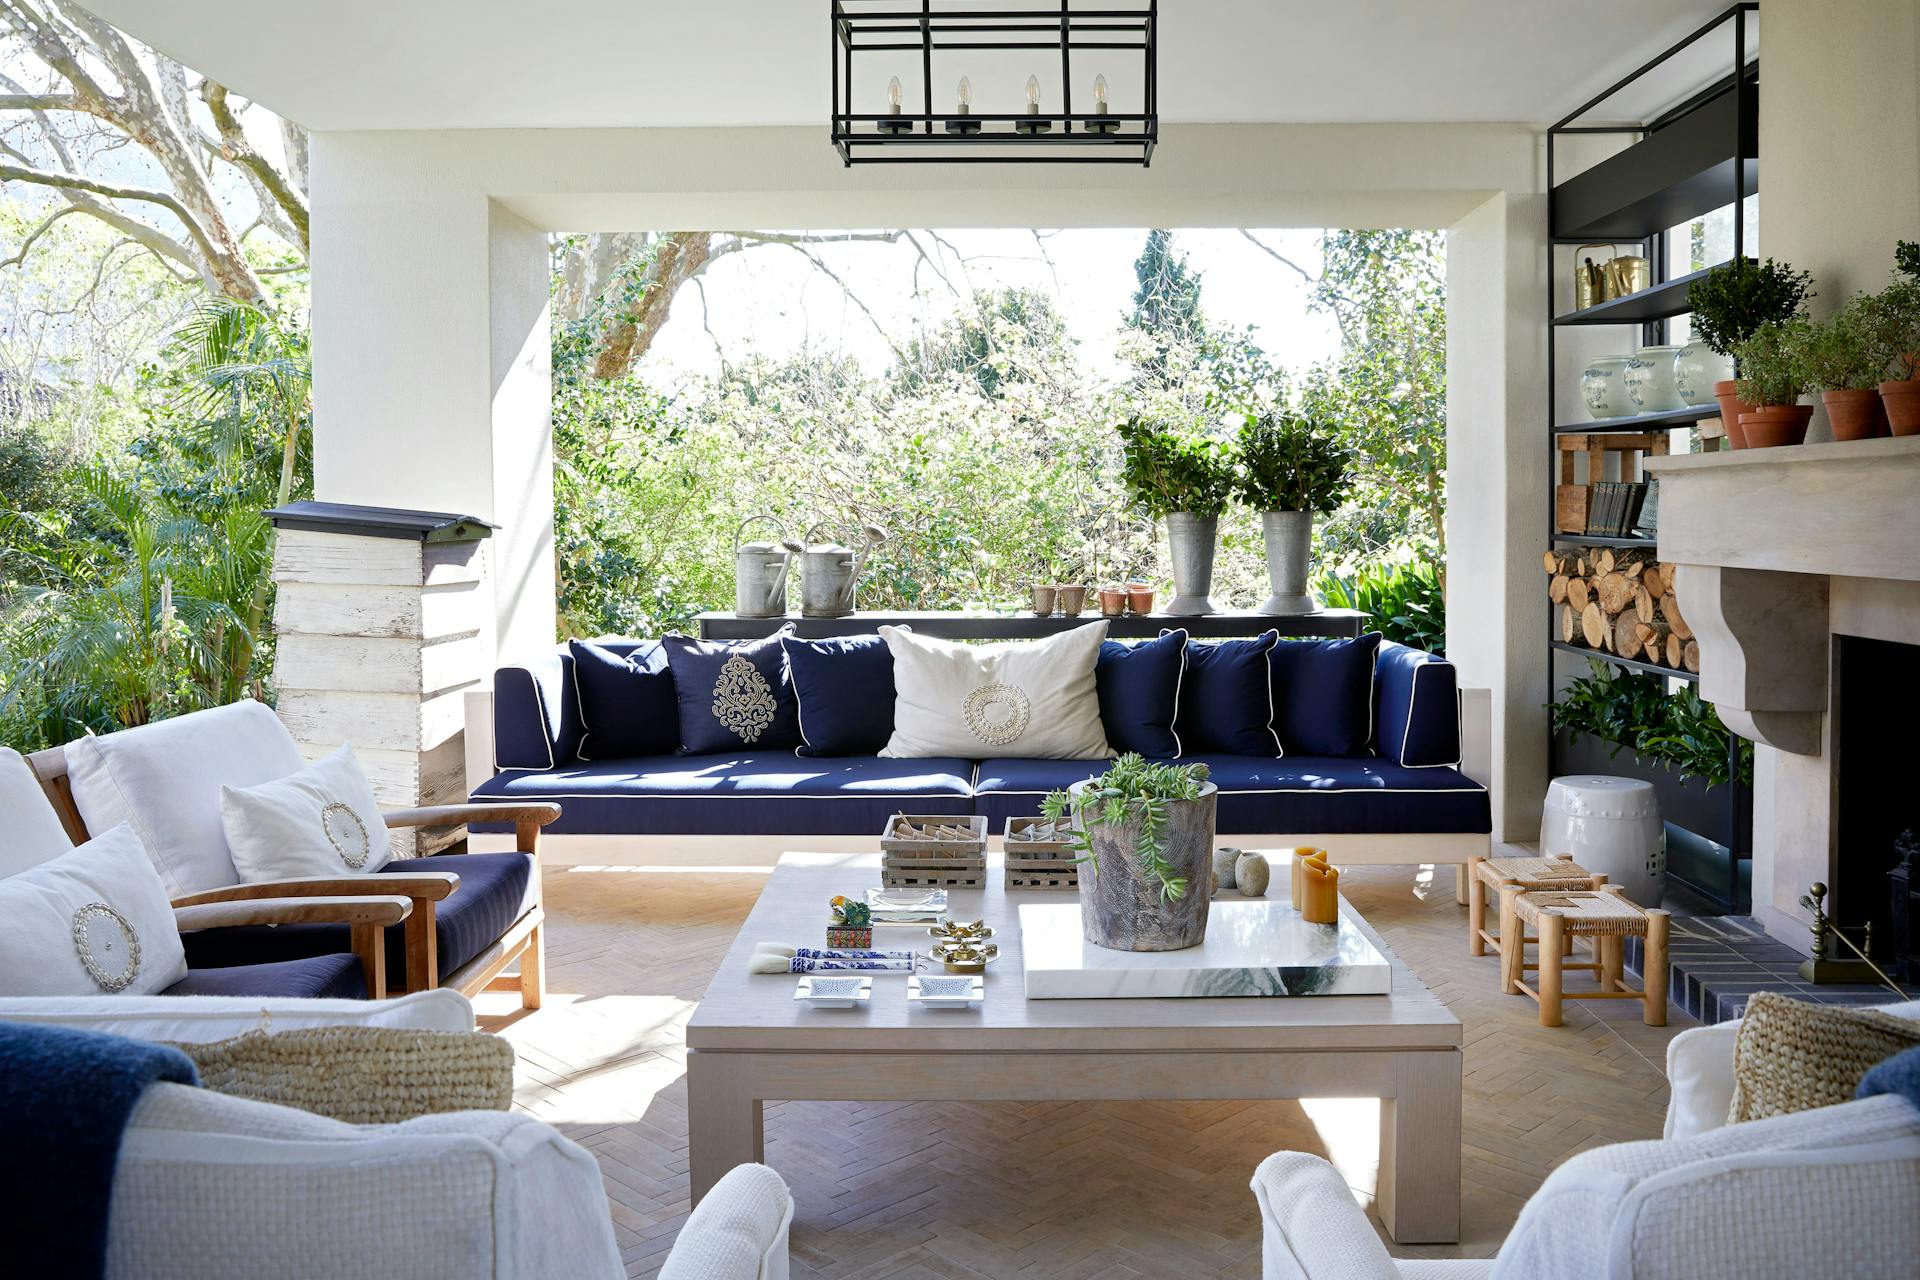 An outdoor entertainment area on a patio with a square coffee table in the foreground, a deep blue sofa behind it, and lush greenery in the background.